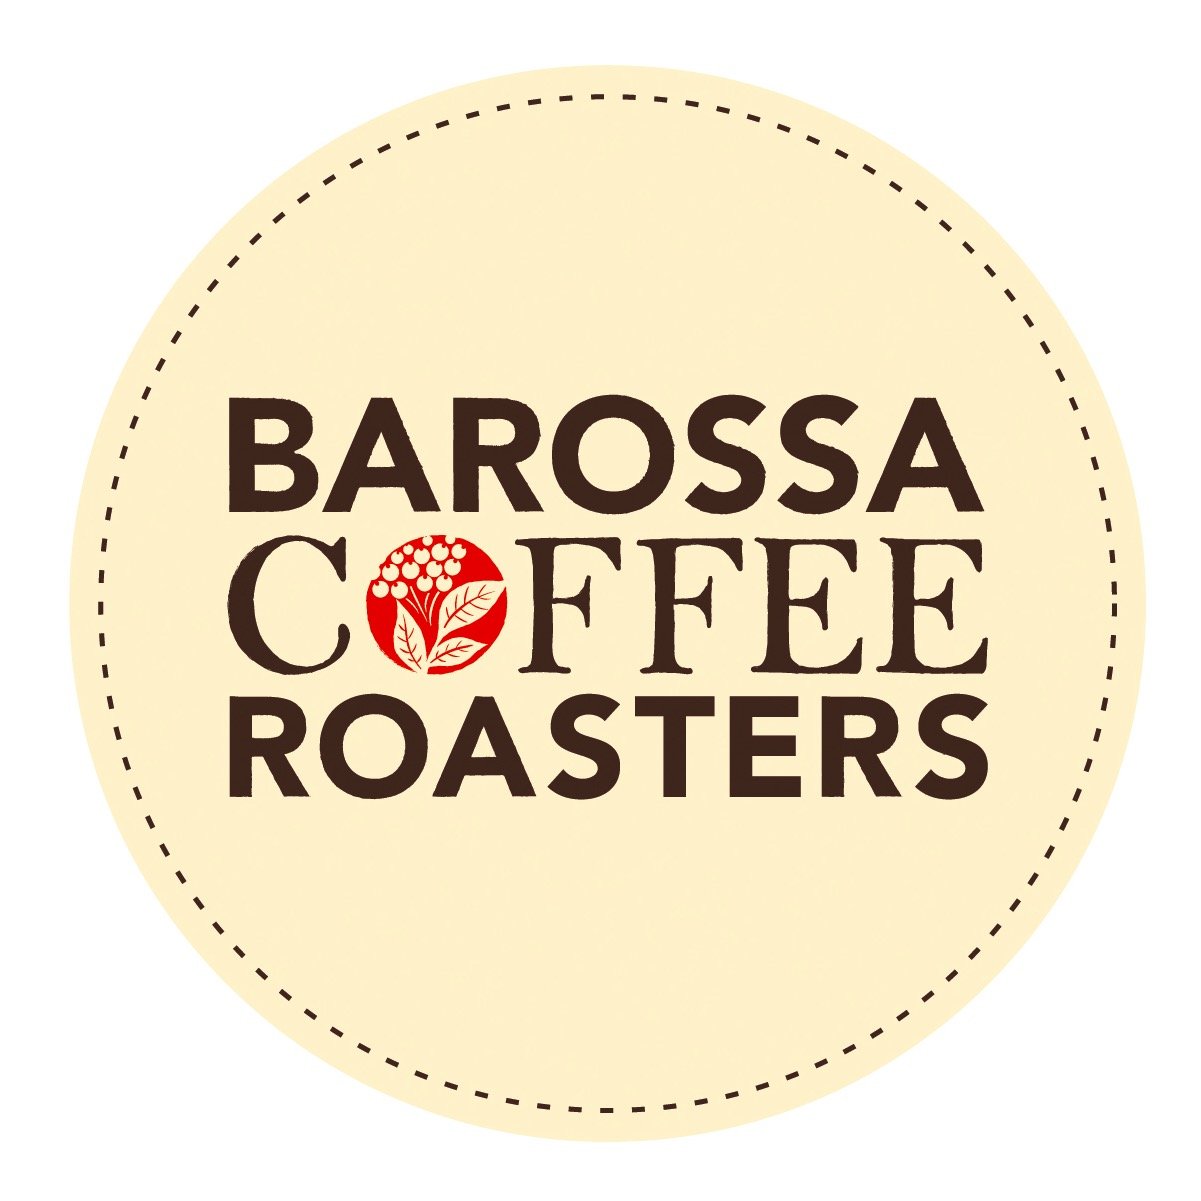 Proudly micro roasting fresh coffee in Australia's most famous wine region ... can it get any better?